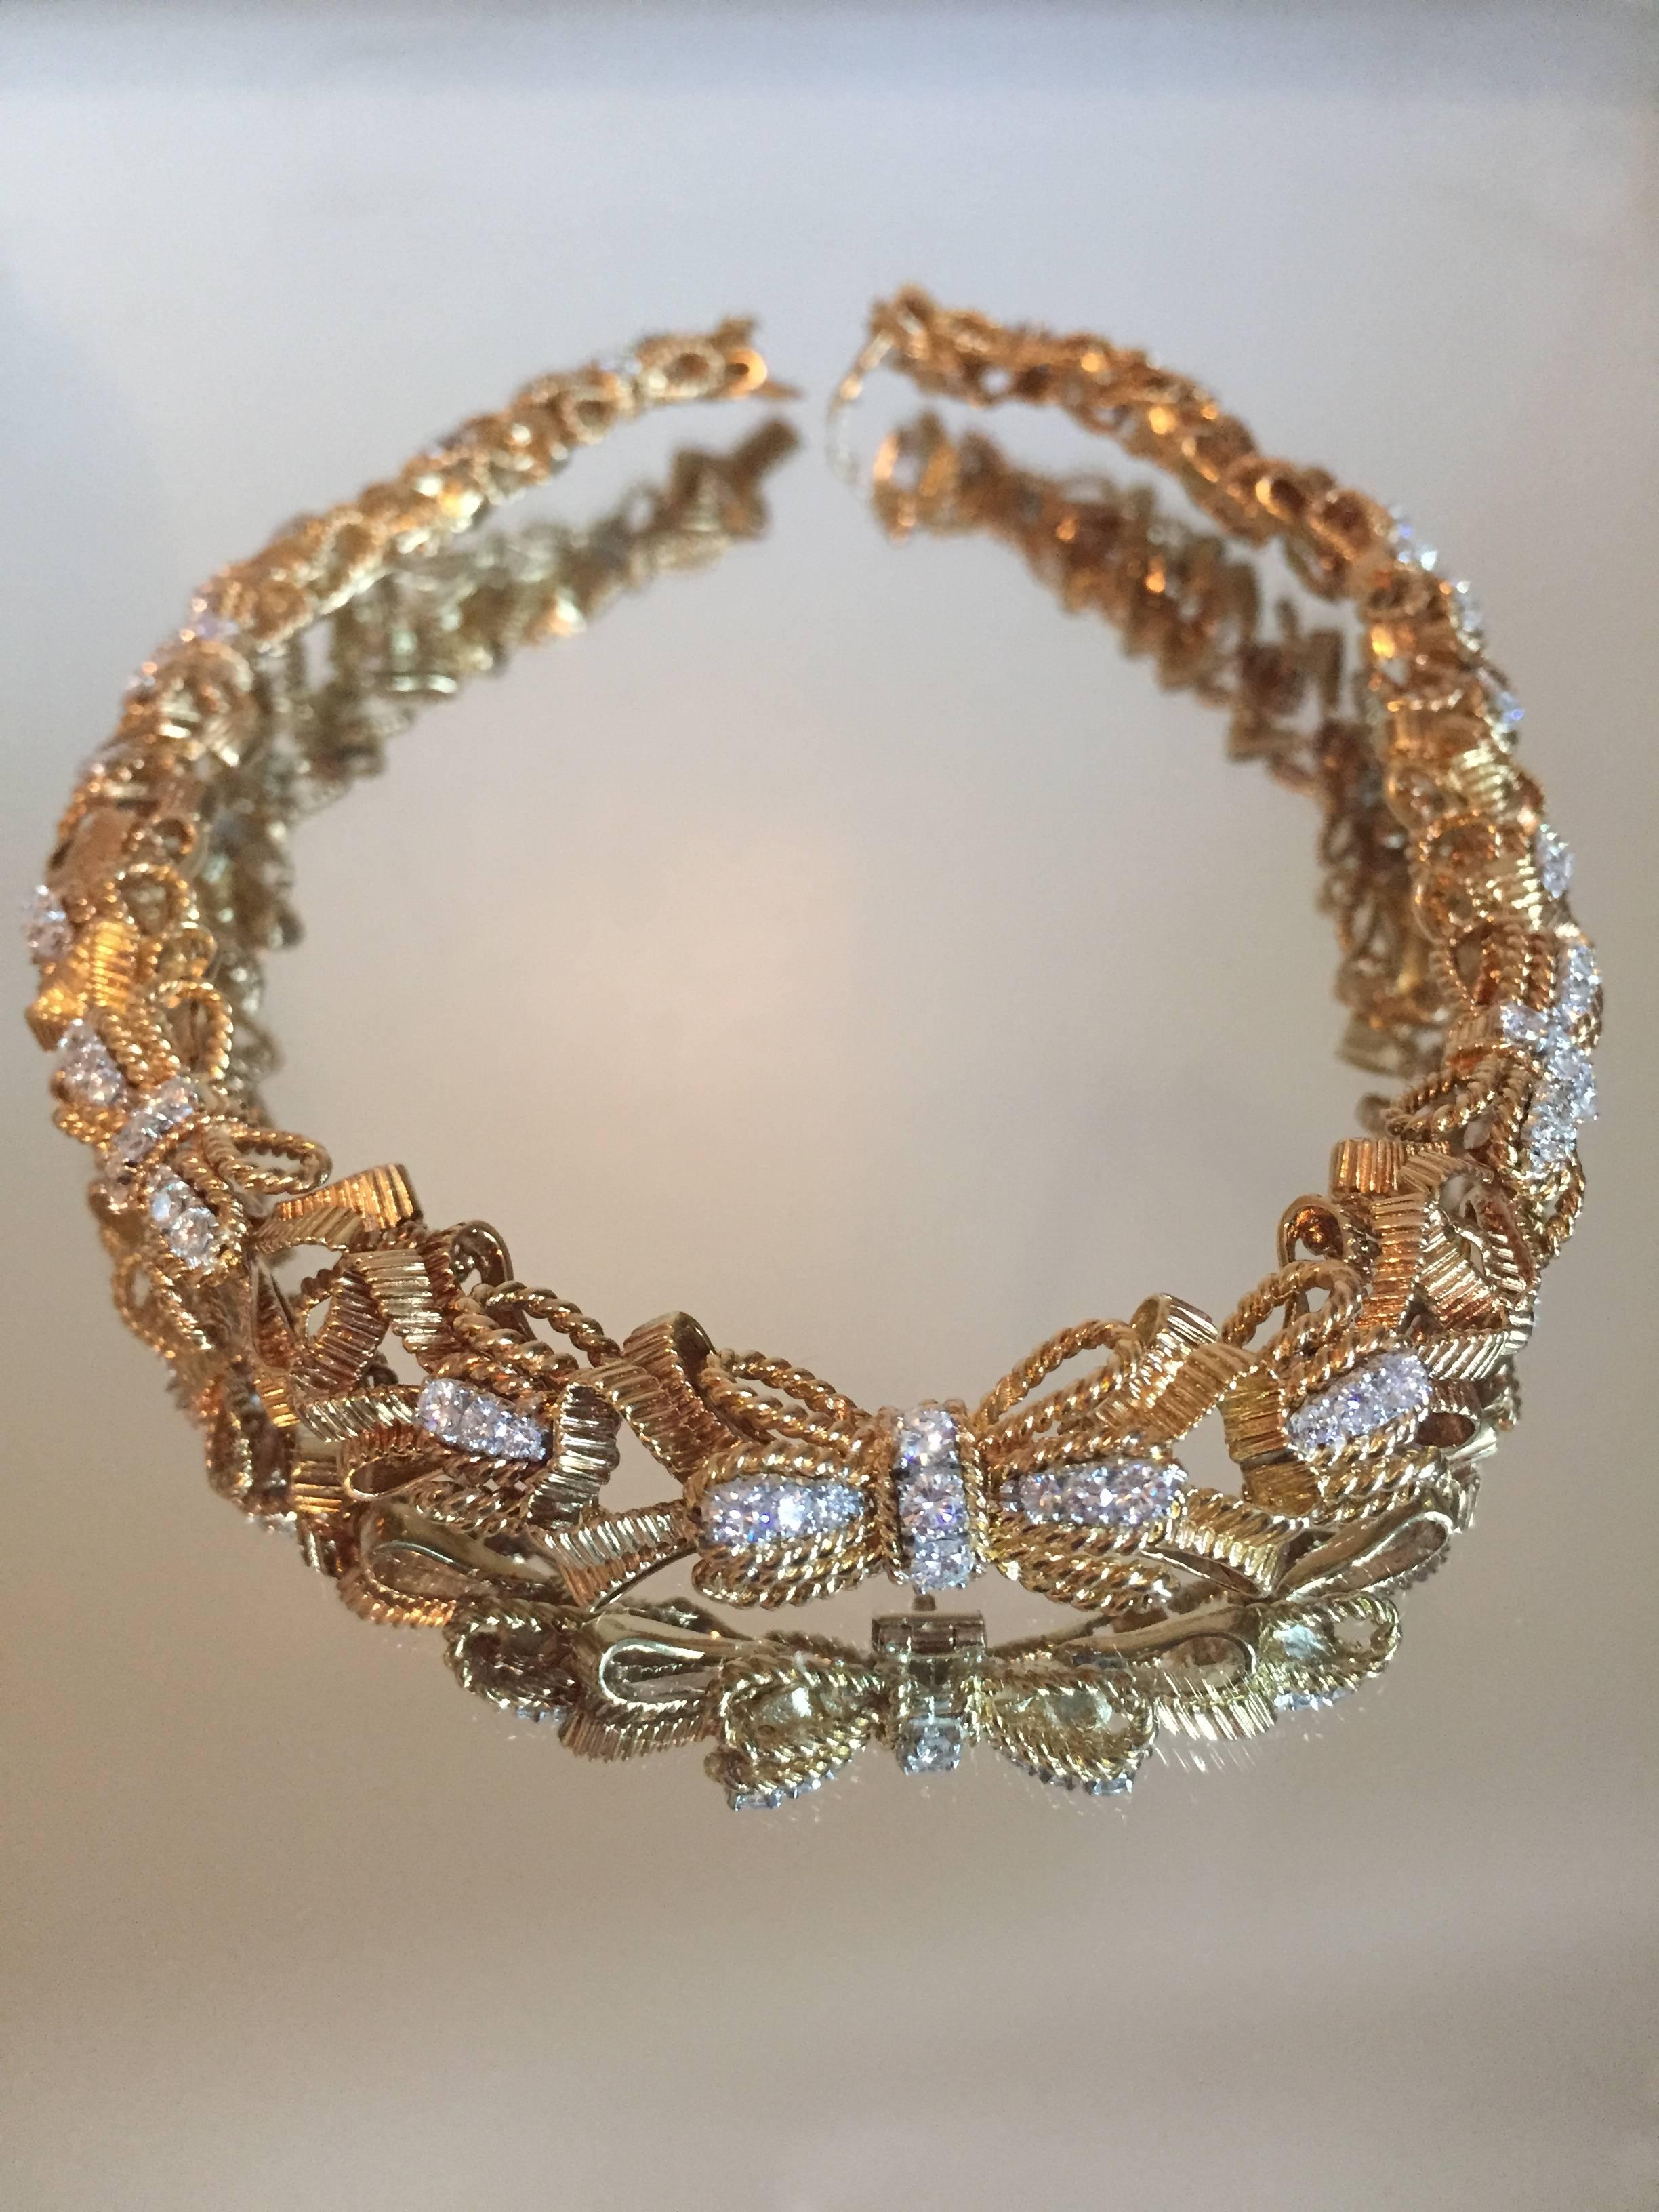 Vintage Tiffany & Co. Schlumberger 18KT yellow gold diamond bow necklace. Necklace contains approximately  3.00CTS. in diamonds. Diamonds are E - F in color and VVS - VS in clarity. Necklace weighs 112.00 grams. Necklace is 16 inches in length and